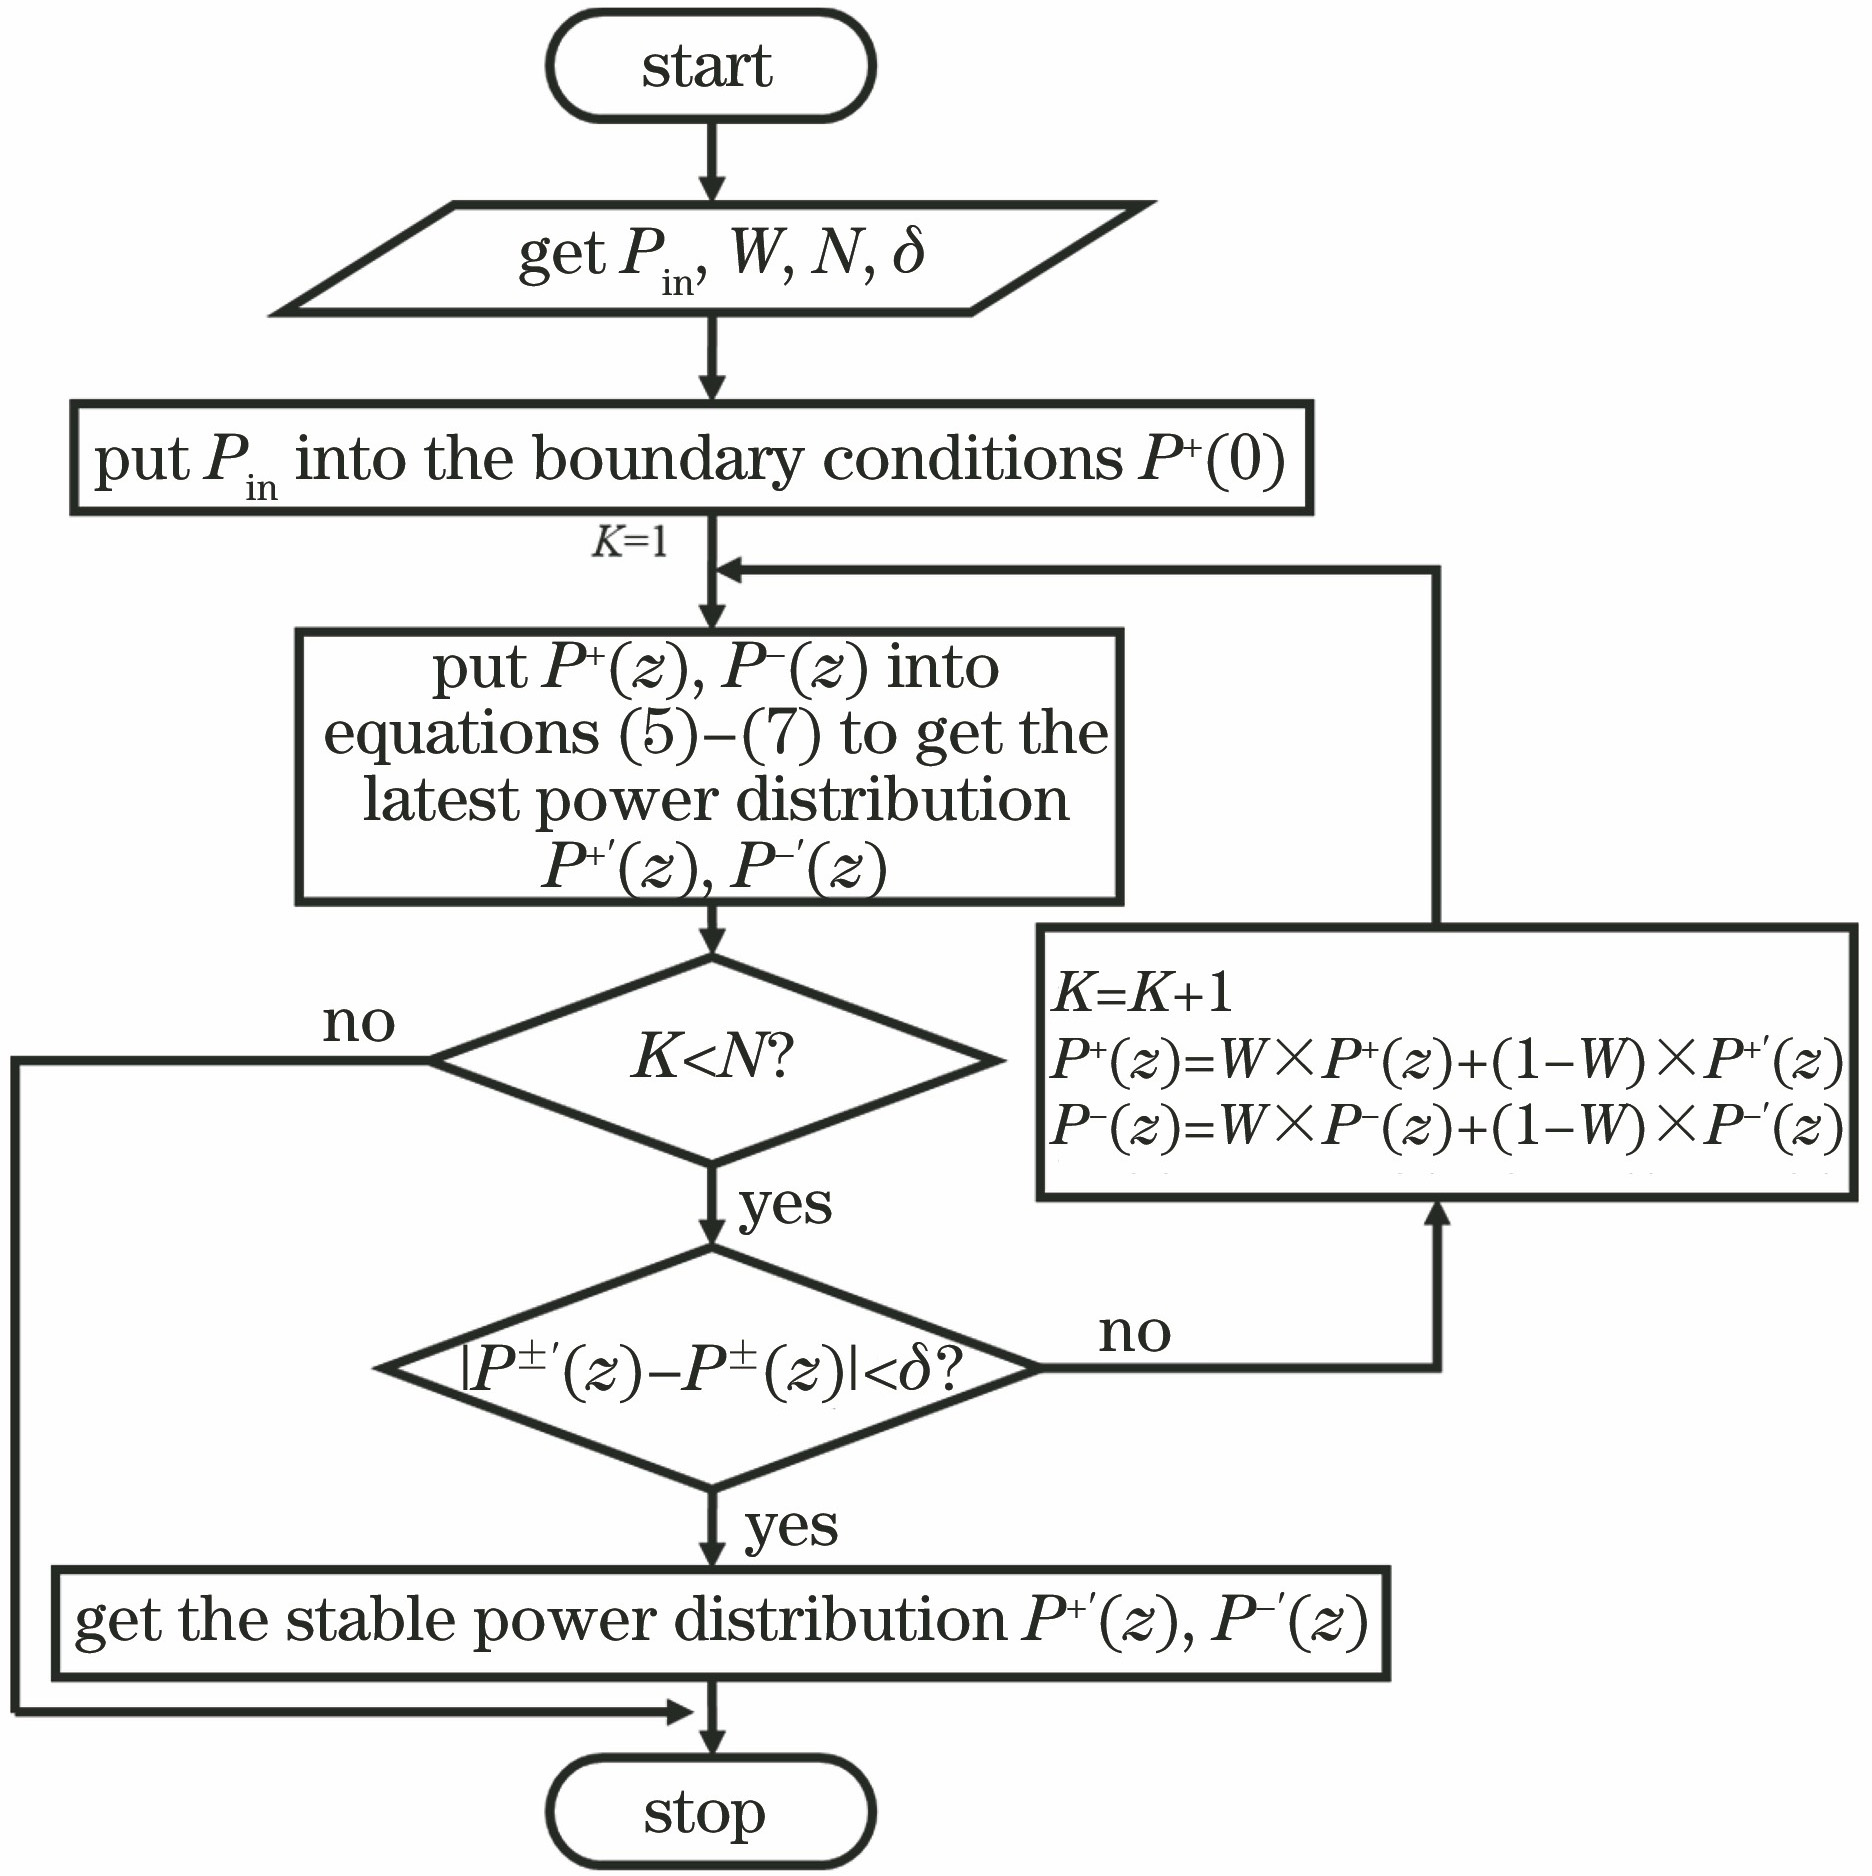 Flow chart of equation solution